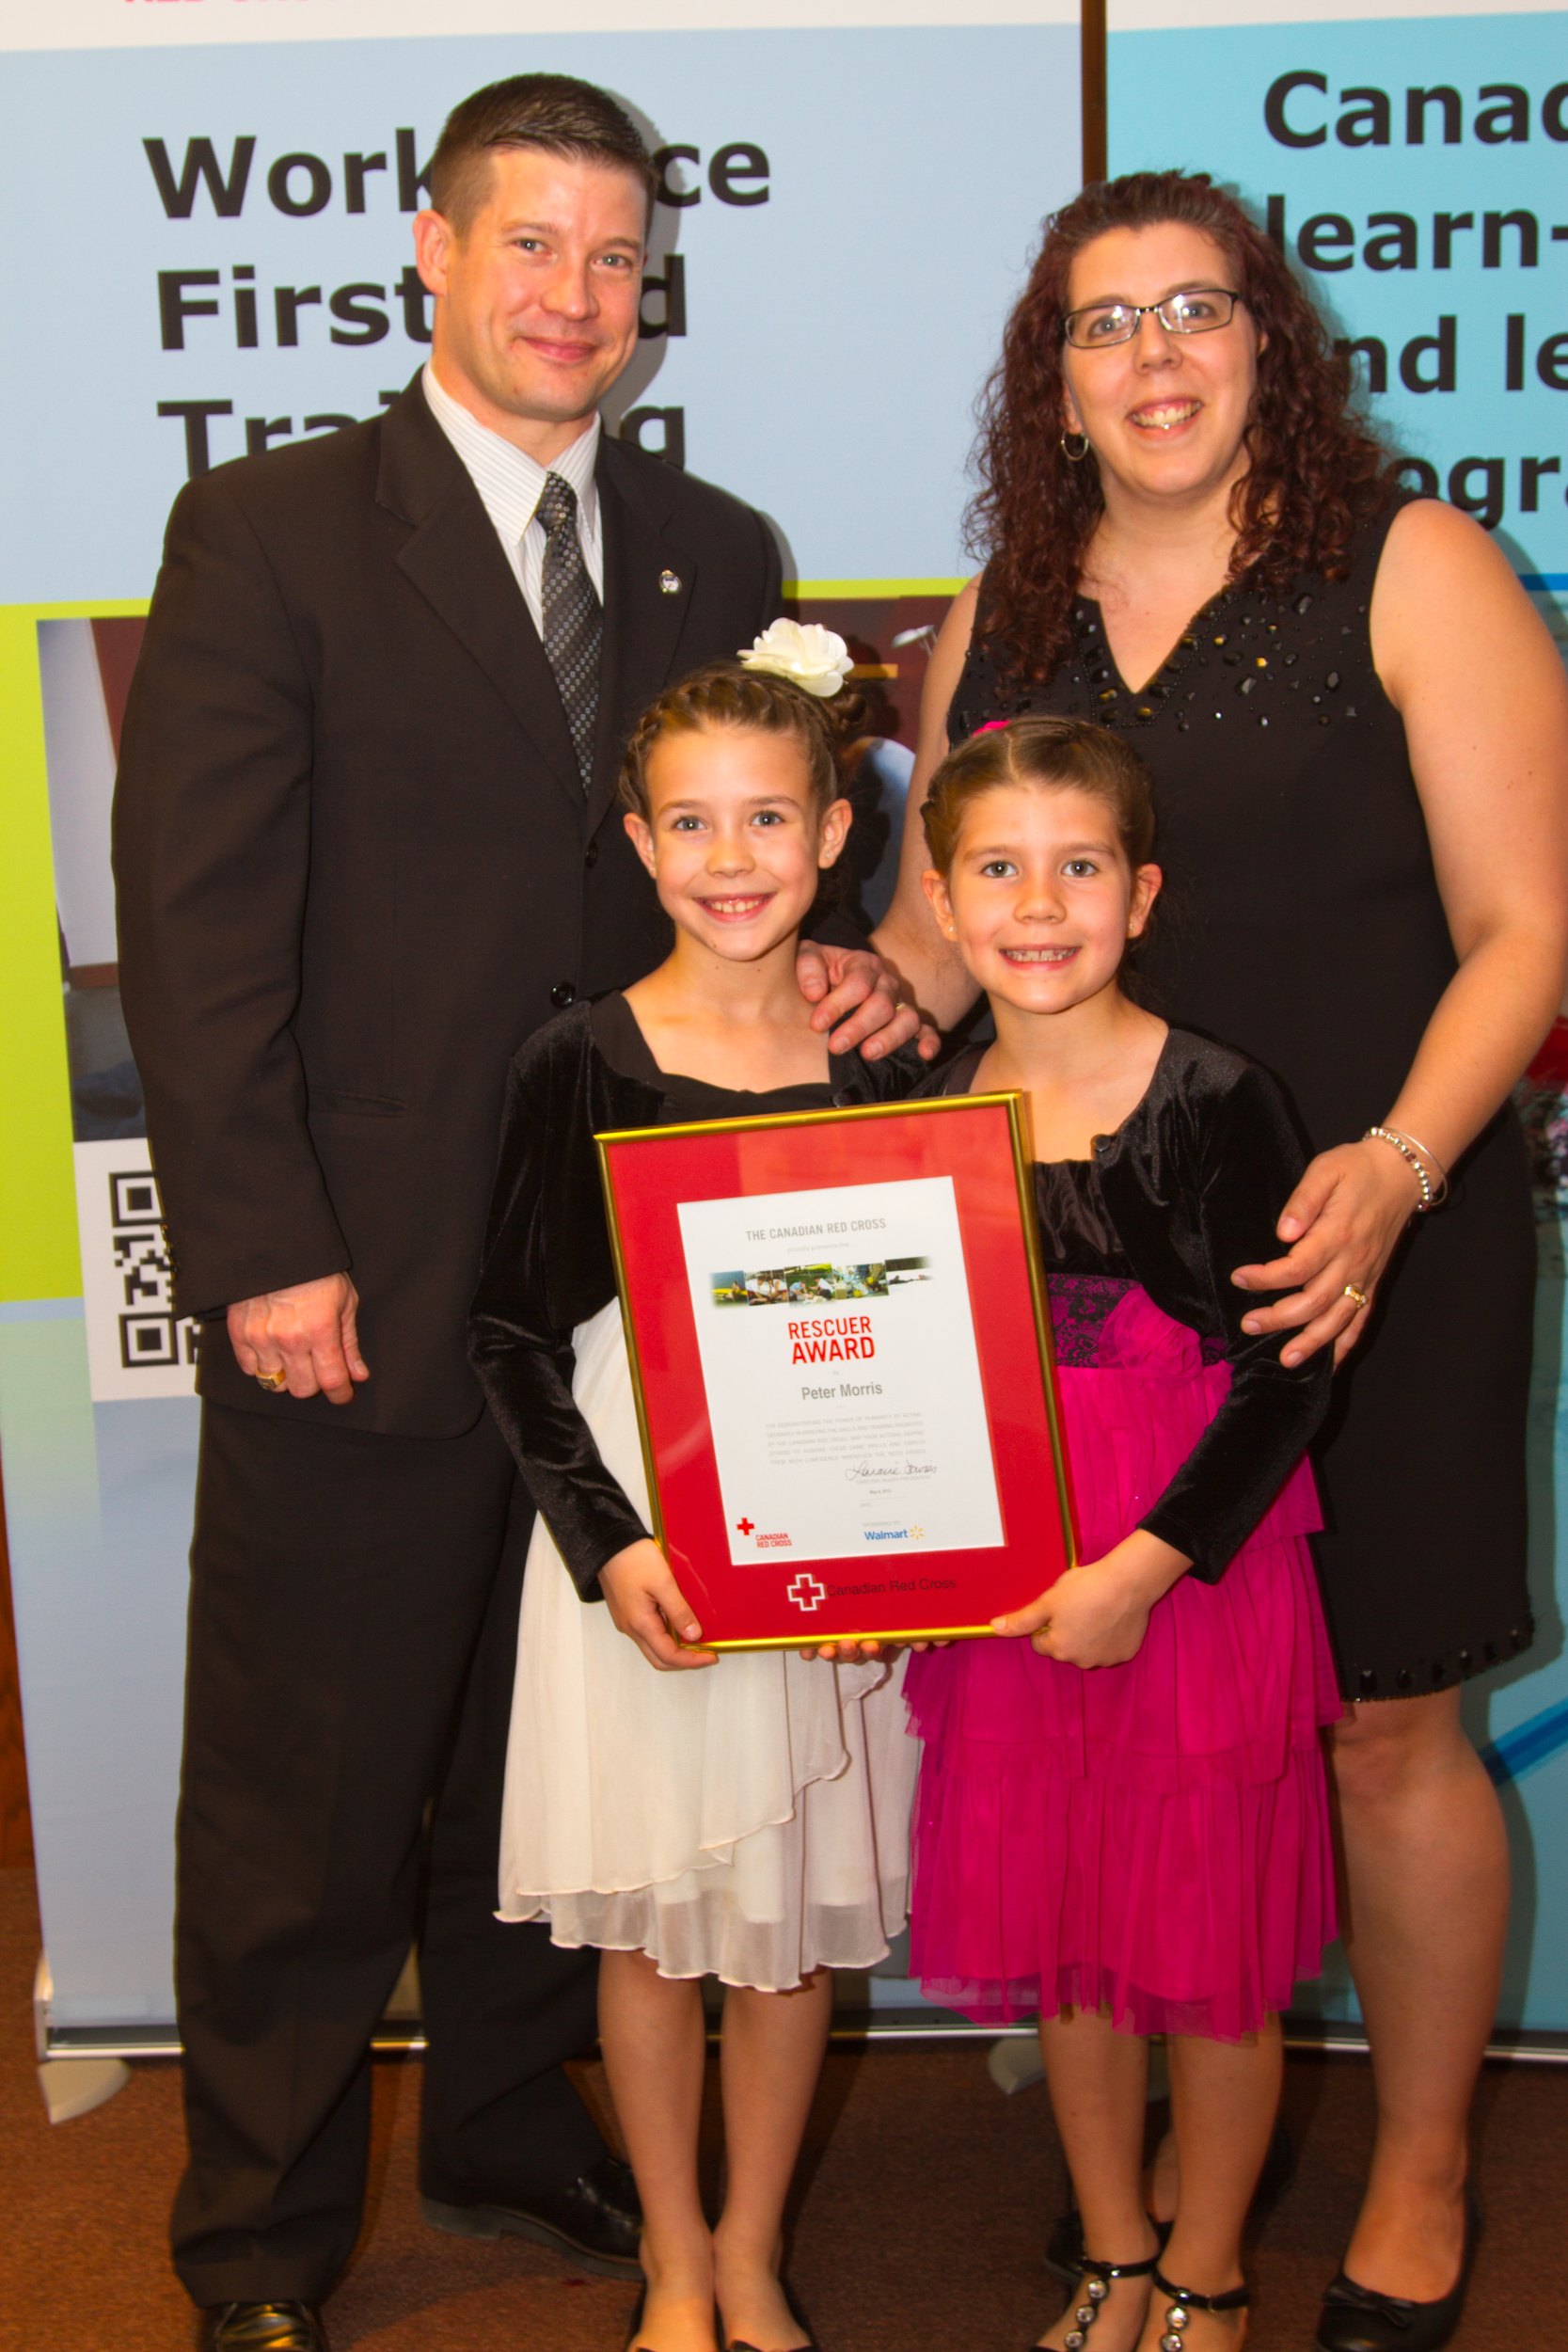 Constable Peter Morris and his family. Const. Morris received a Rescue Award from the Red Cross.